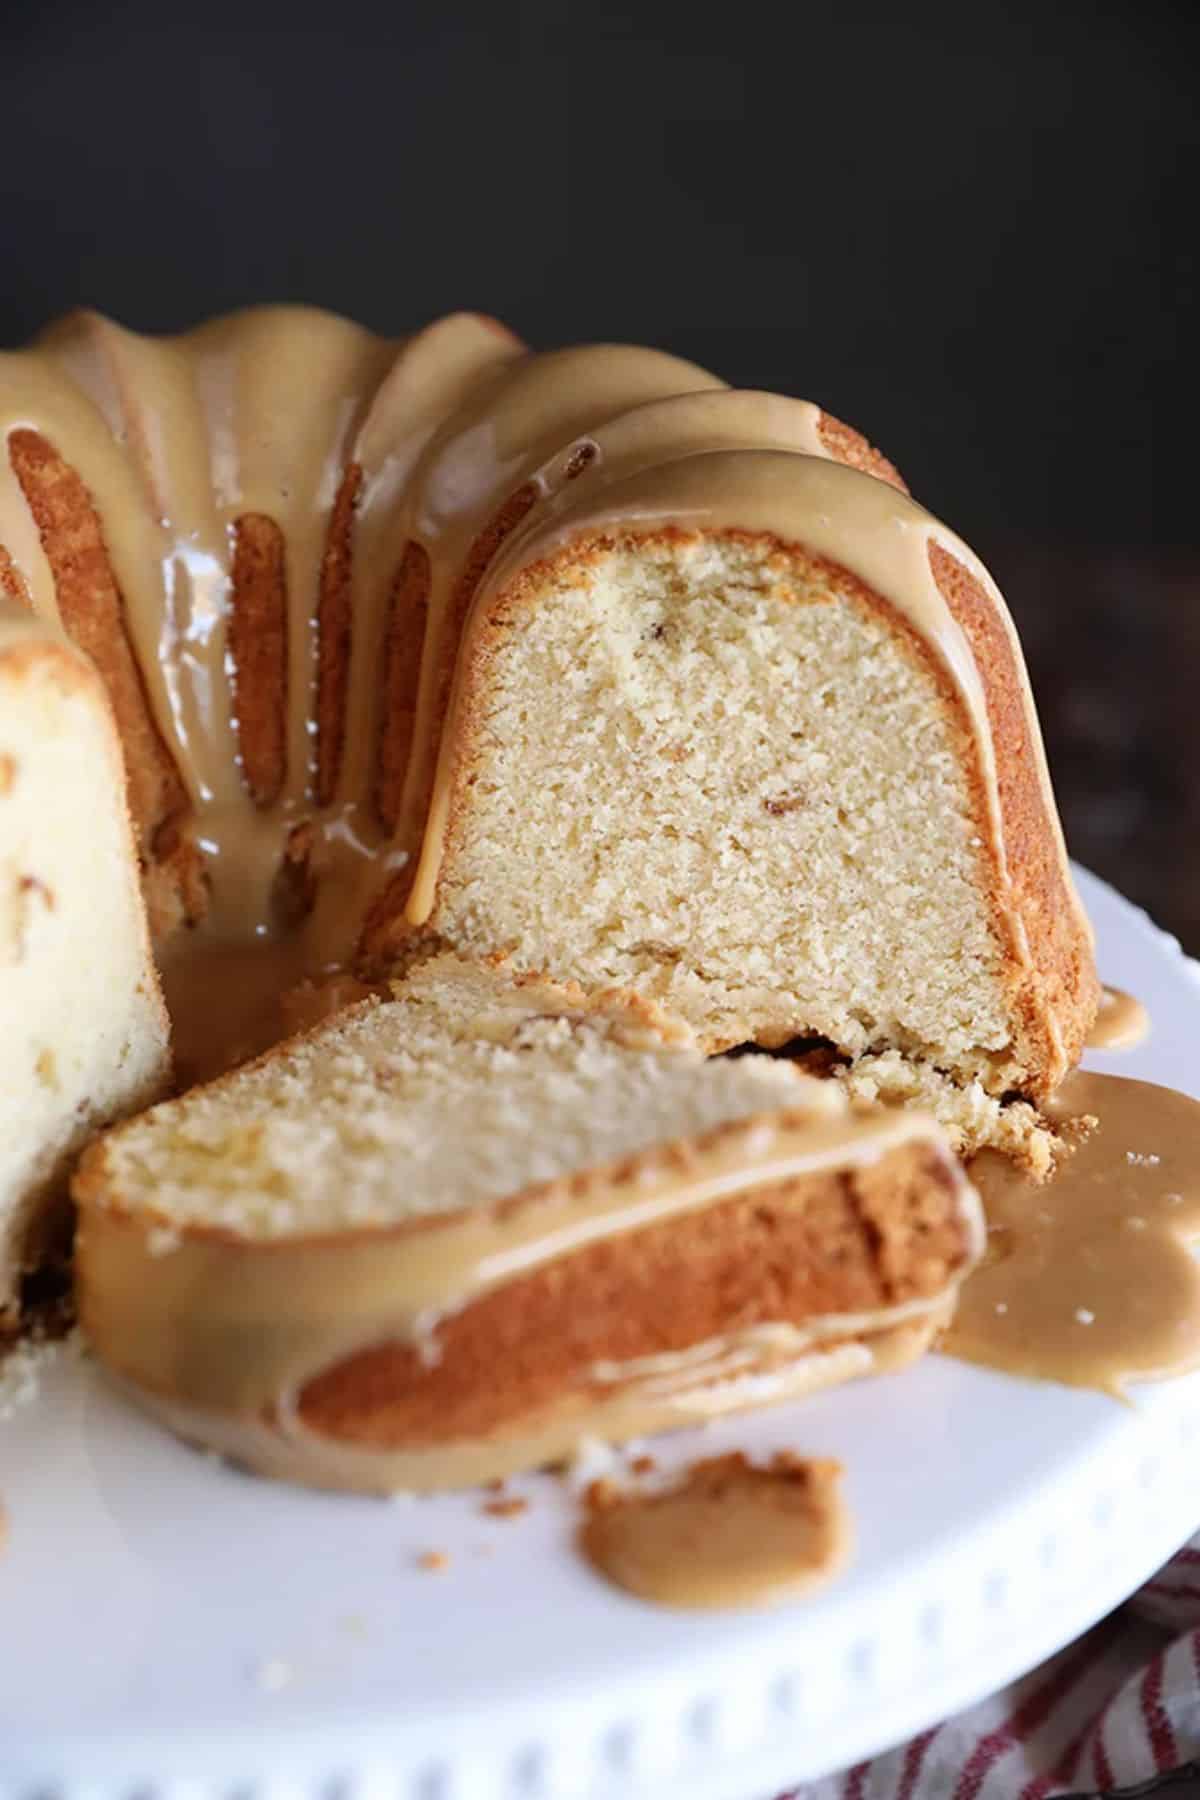 Partially sliced Peanut Butter Cream Pound Cake on a cake tray.